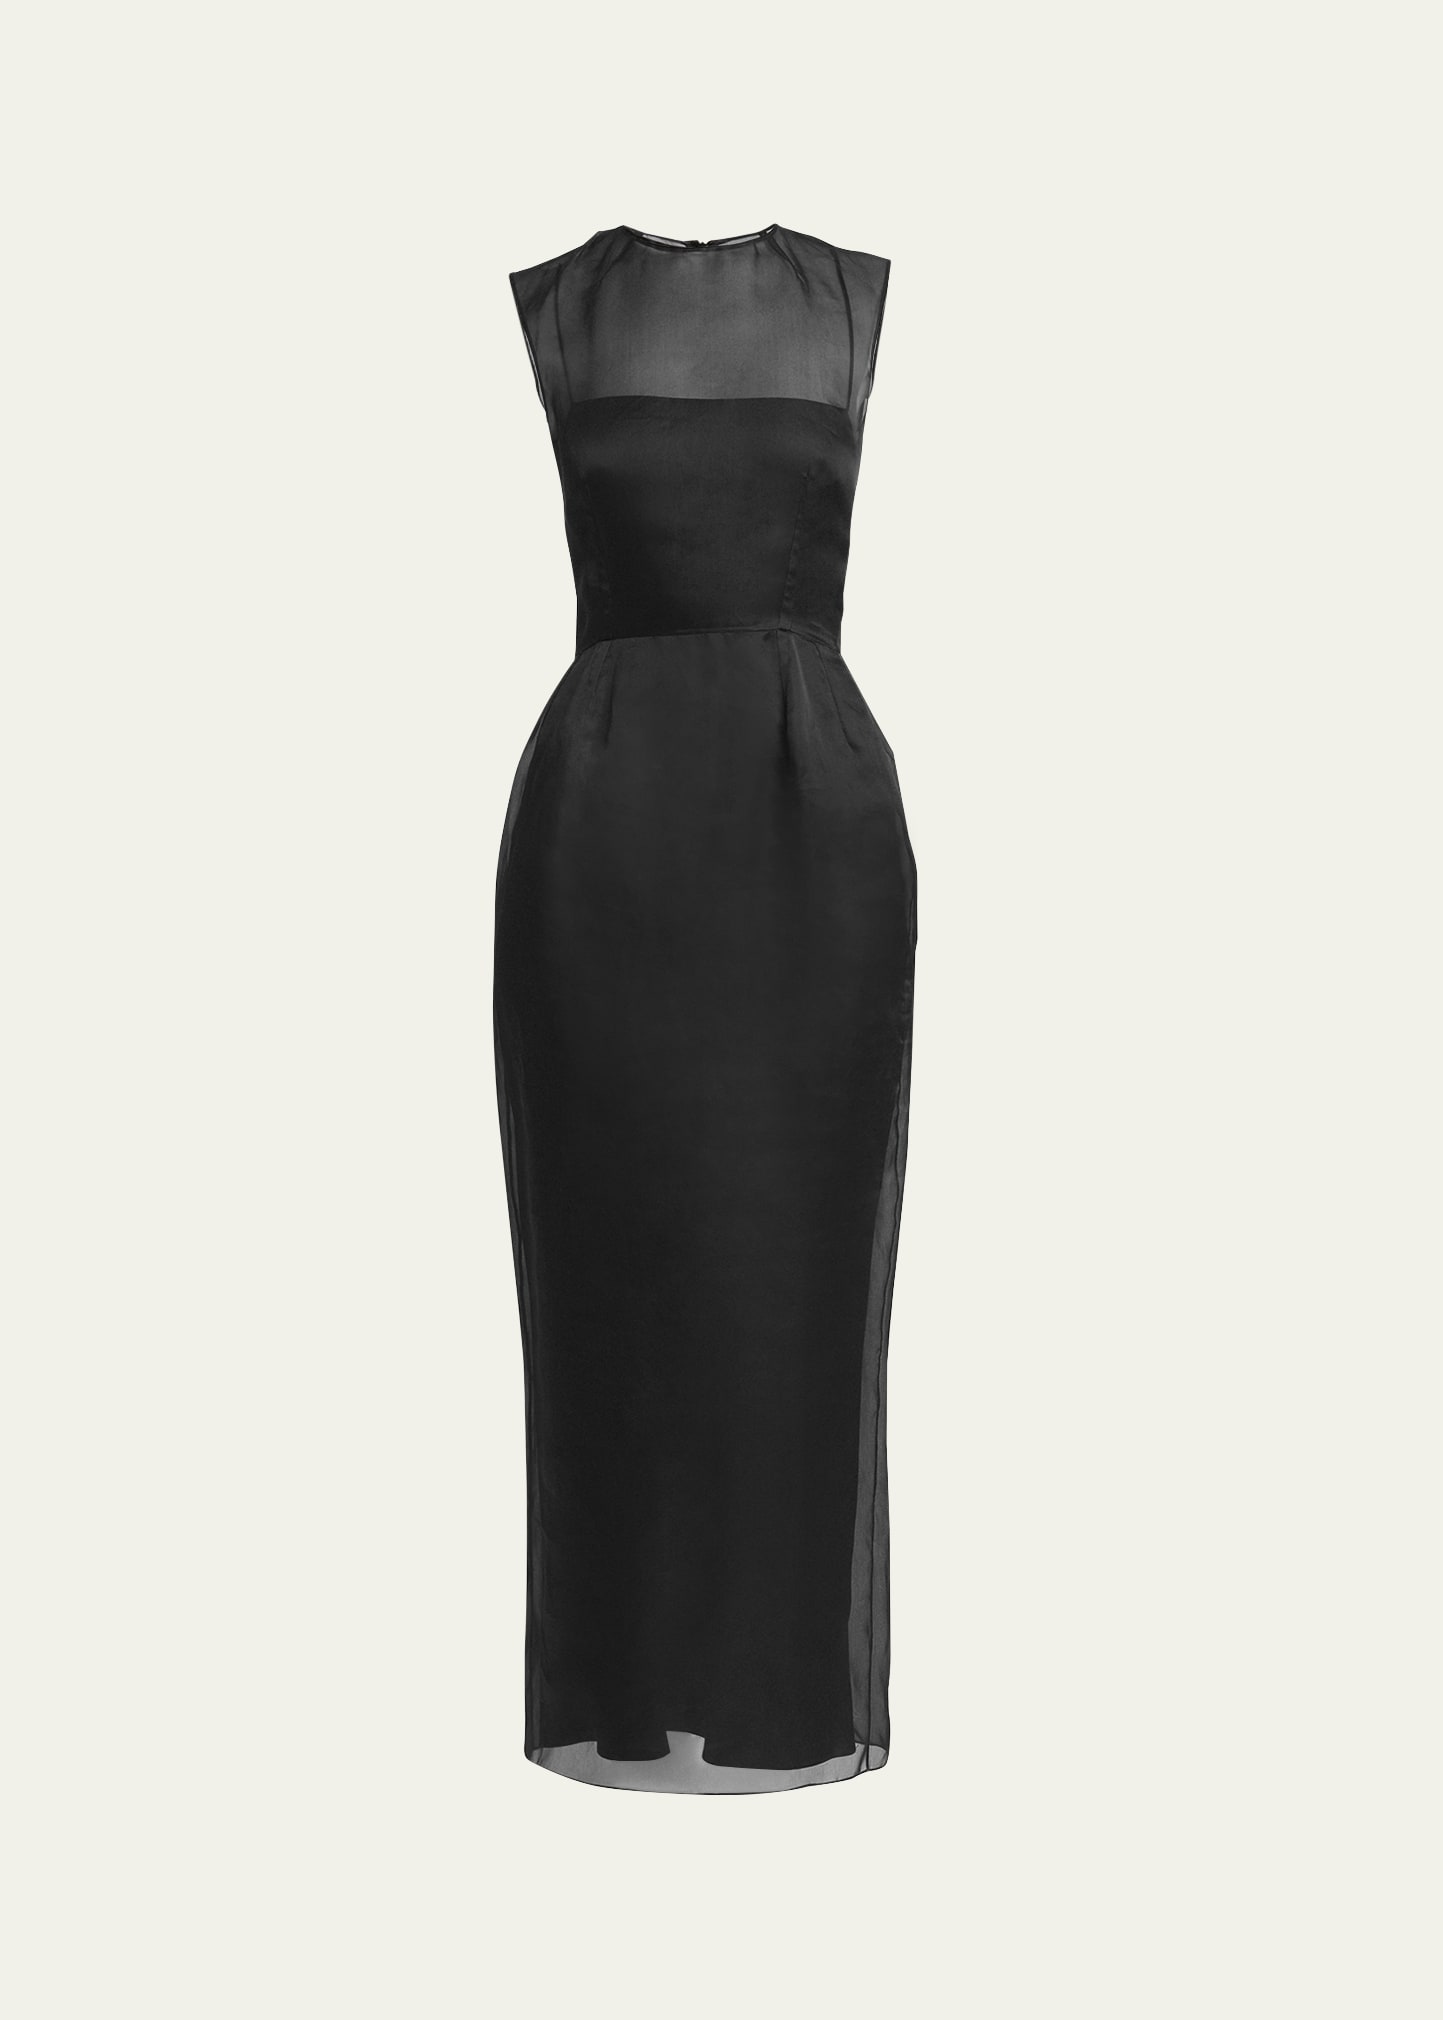 Second Life Marketplace - .:S&B:. Mesh Deep Cleavage Gown Satin black